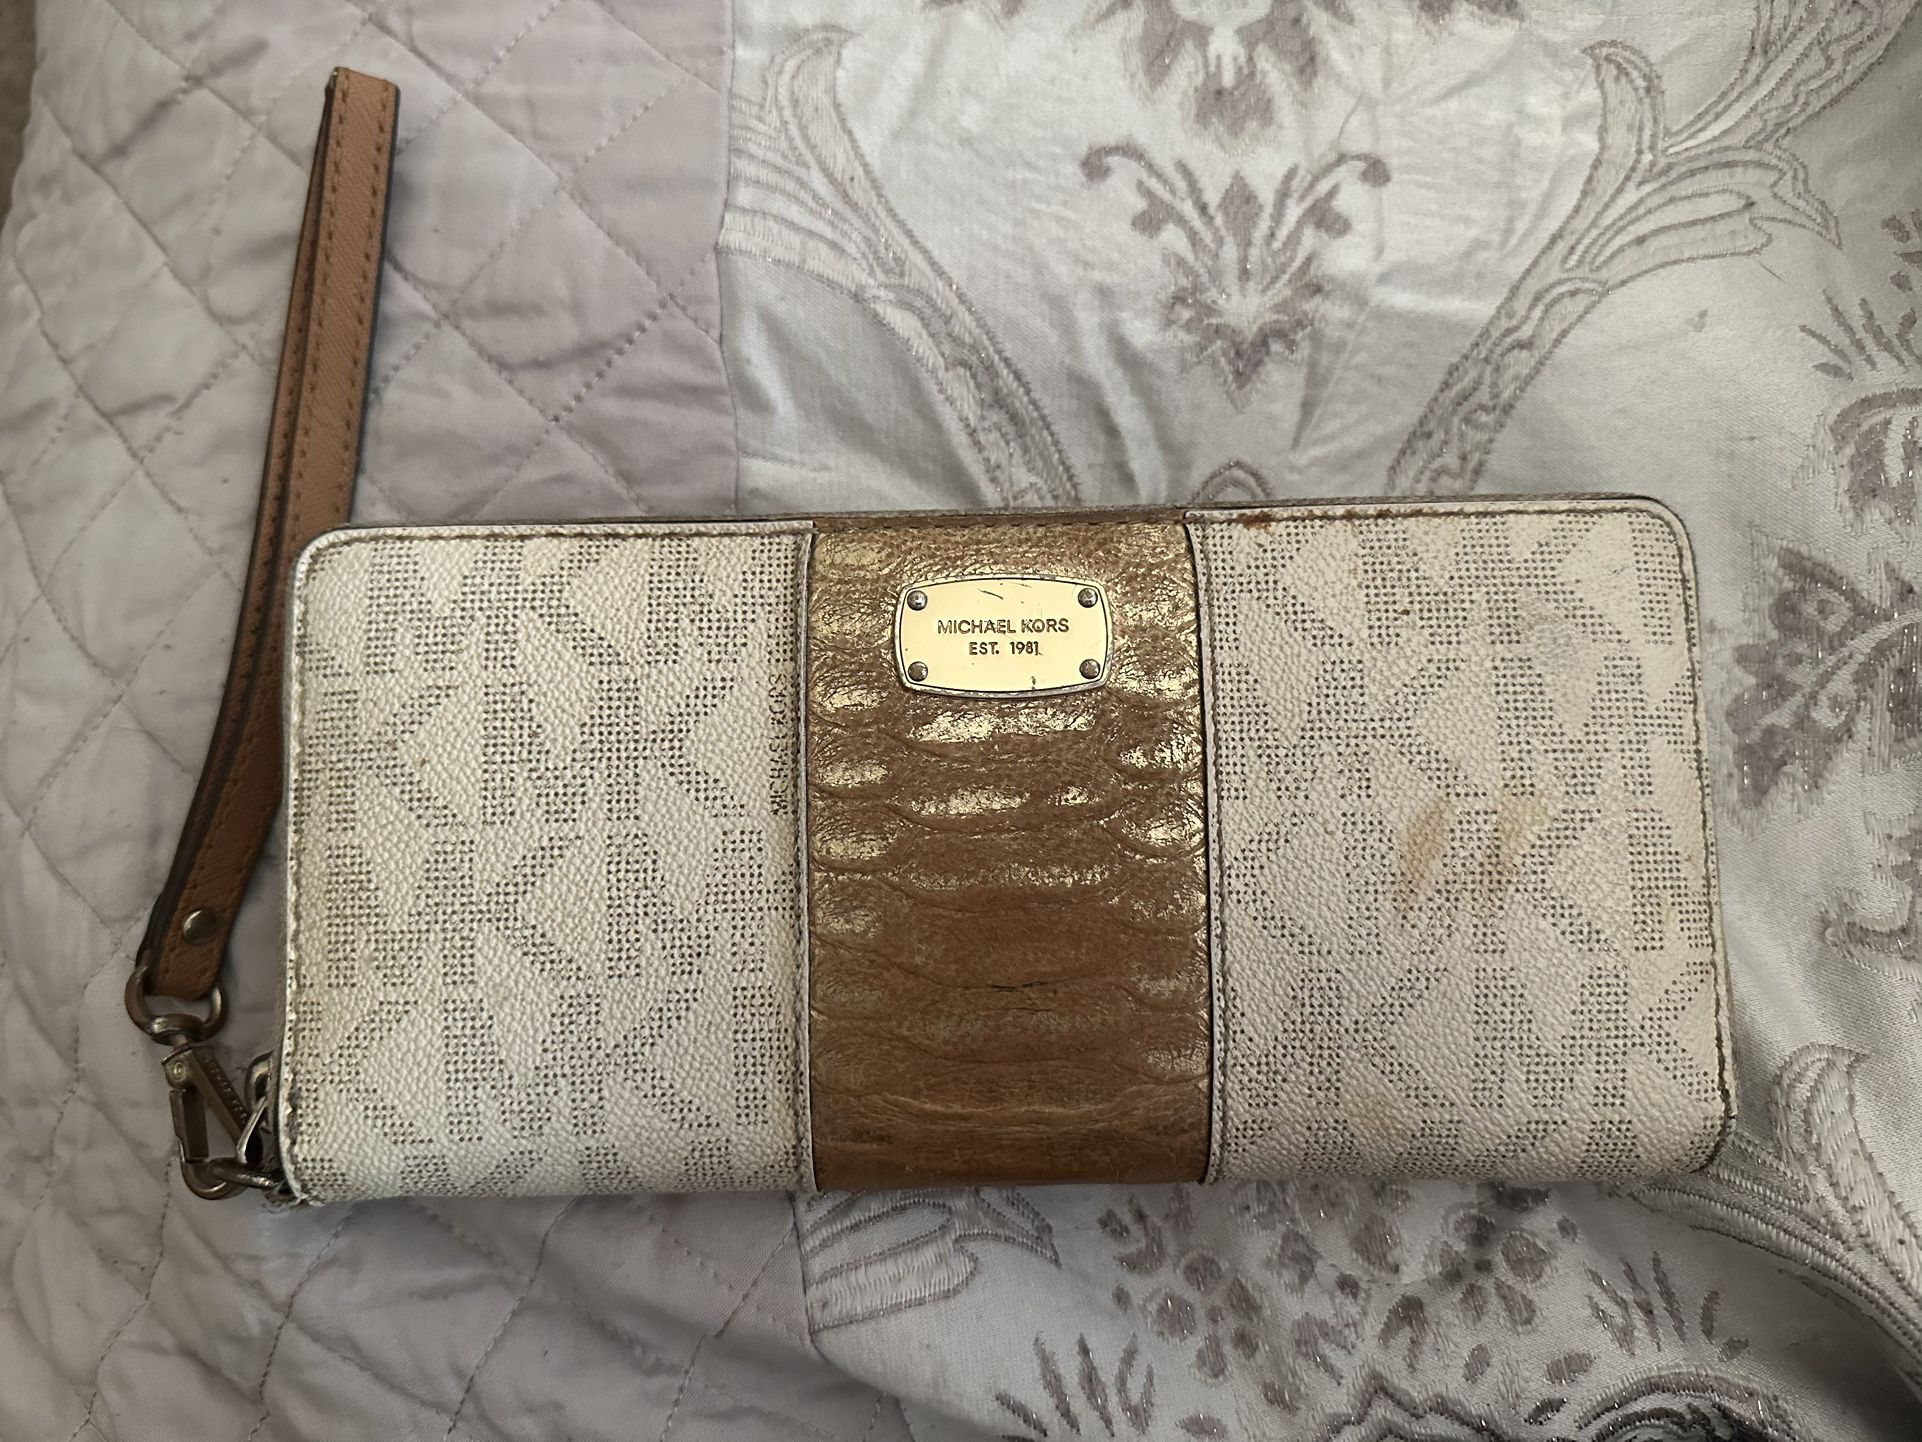 Michael Kors Wallet with Wrist band